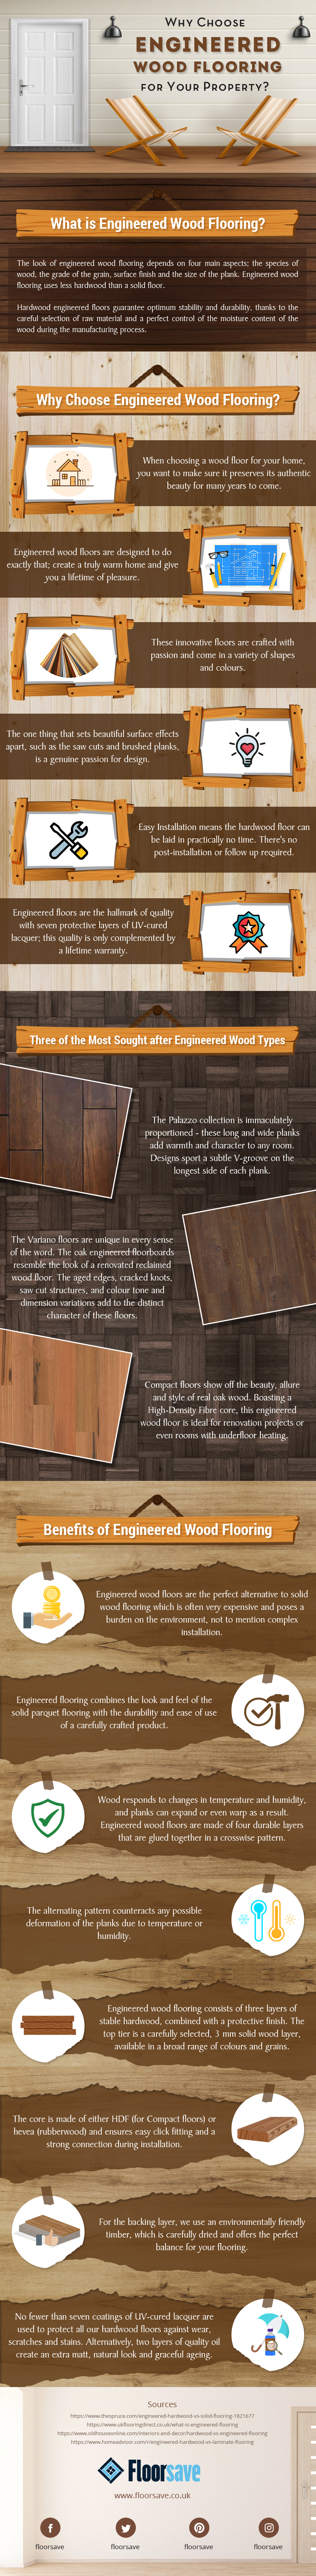 Why Choose Engineered Wood Flooring For Your Property?